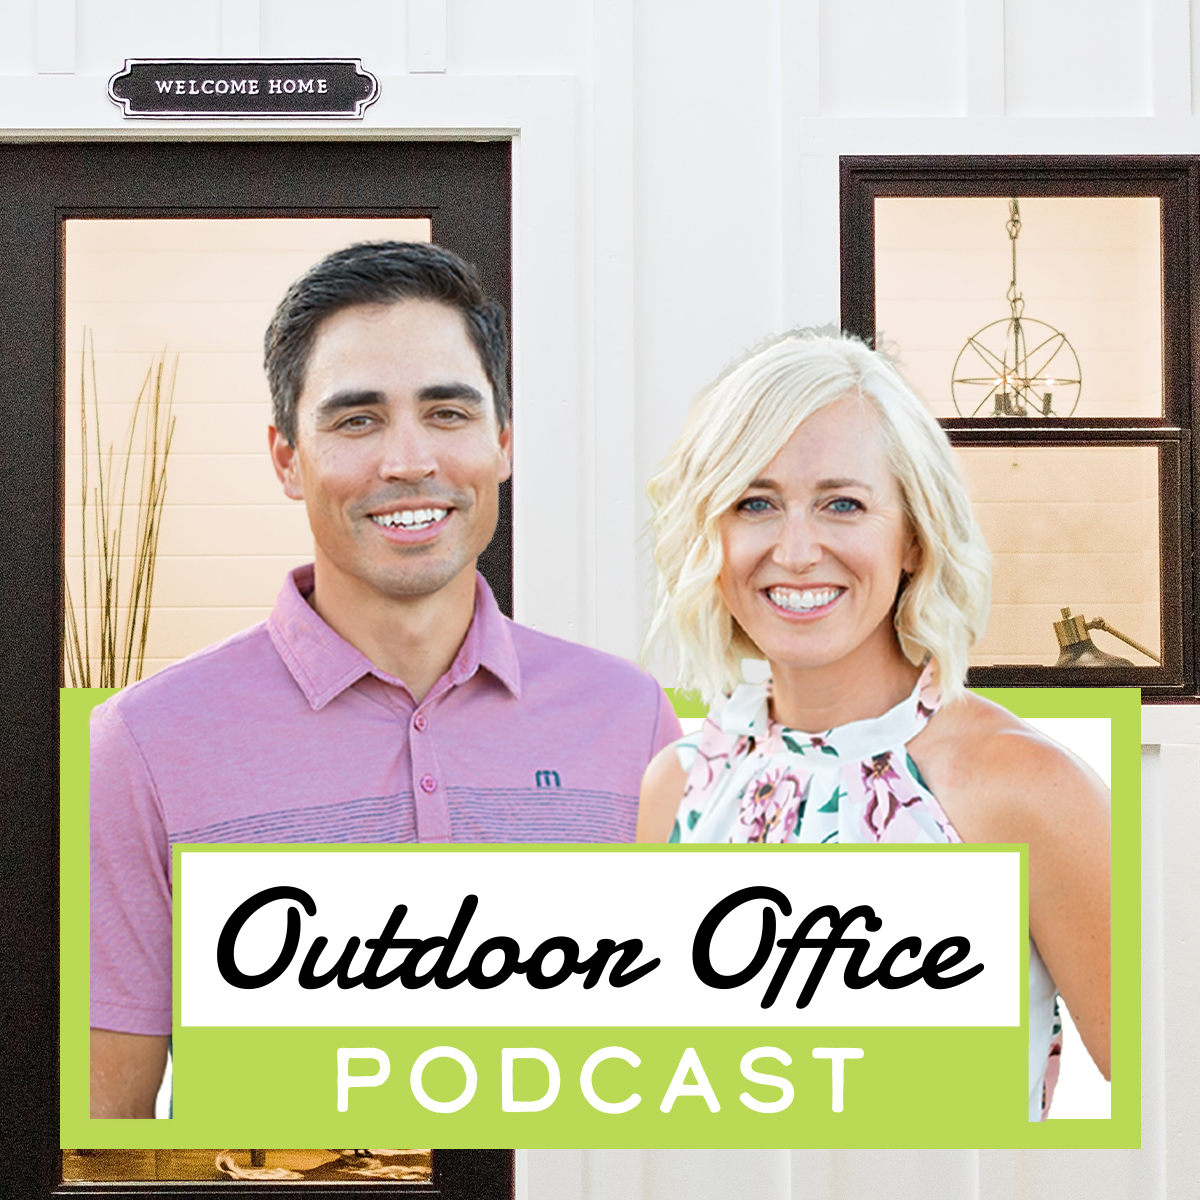 outdooroffice podcast cover 2 (2)